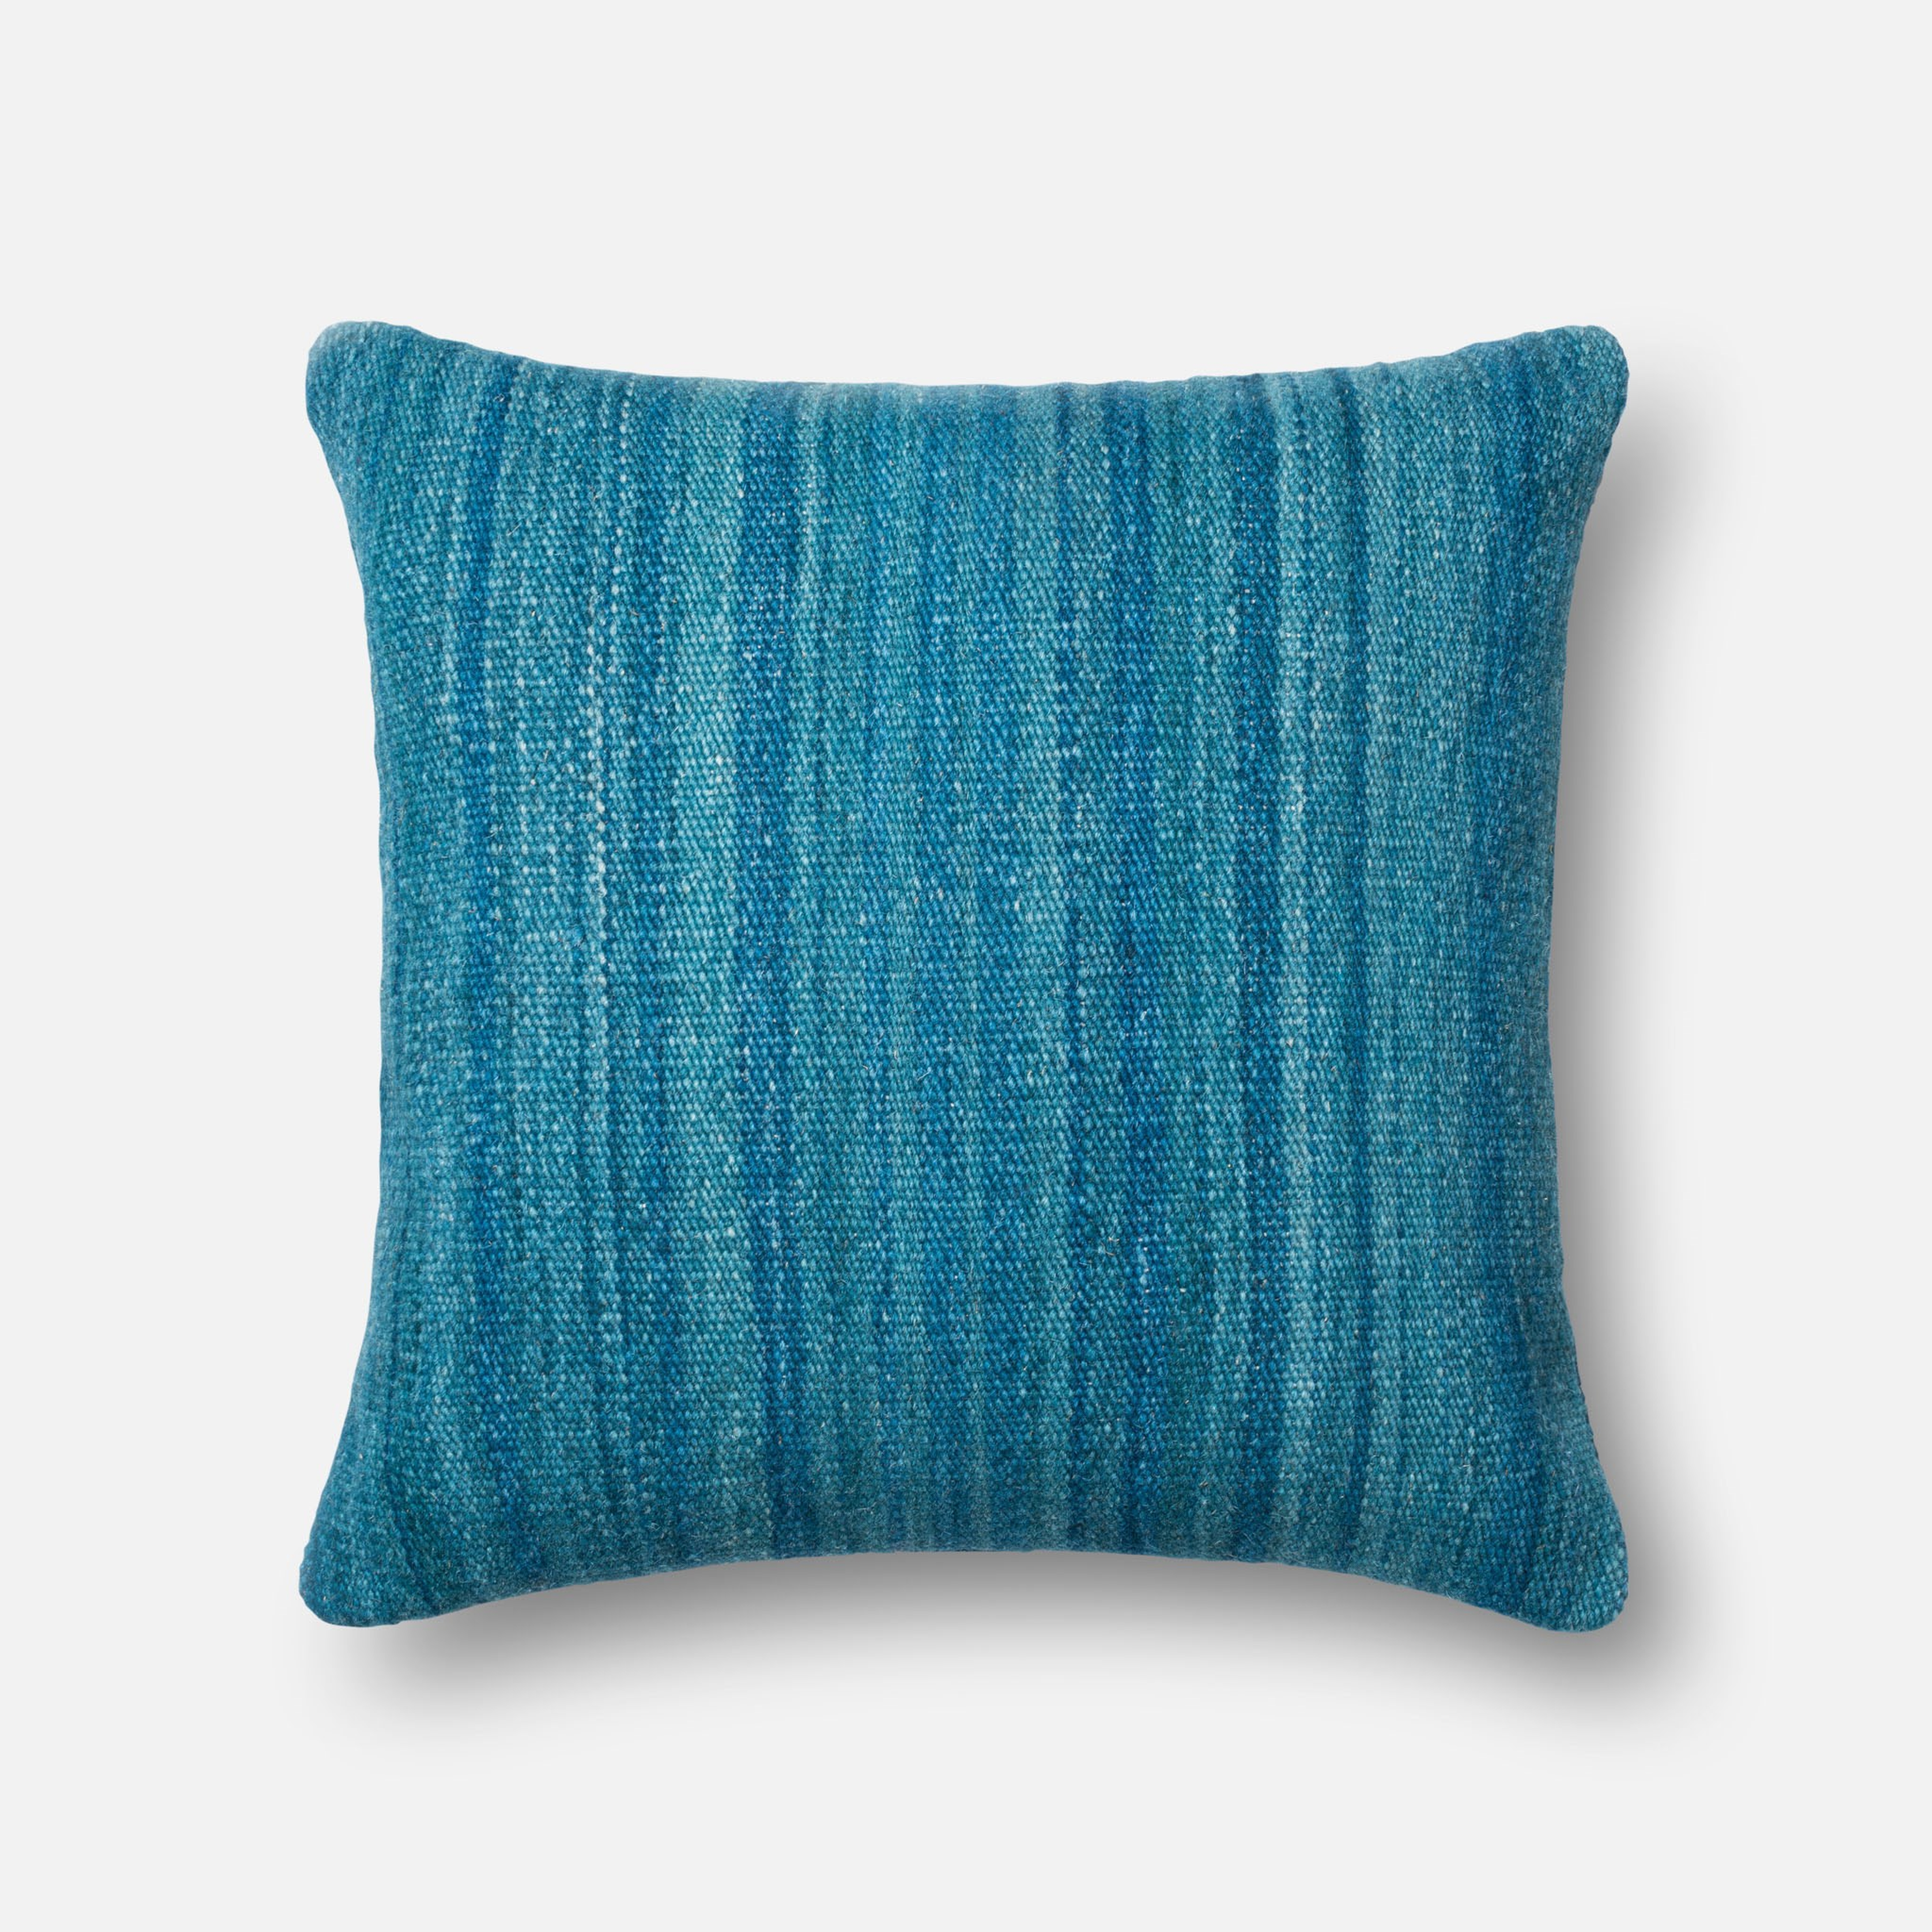 P0167 BLUE 22" x 22" Pillow - With insert - Loloi Rugs